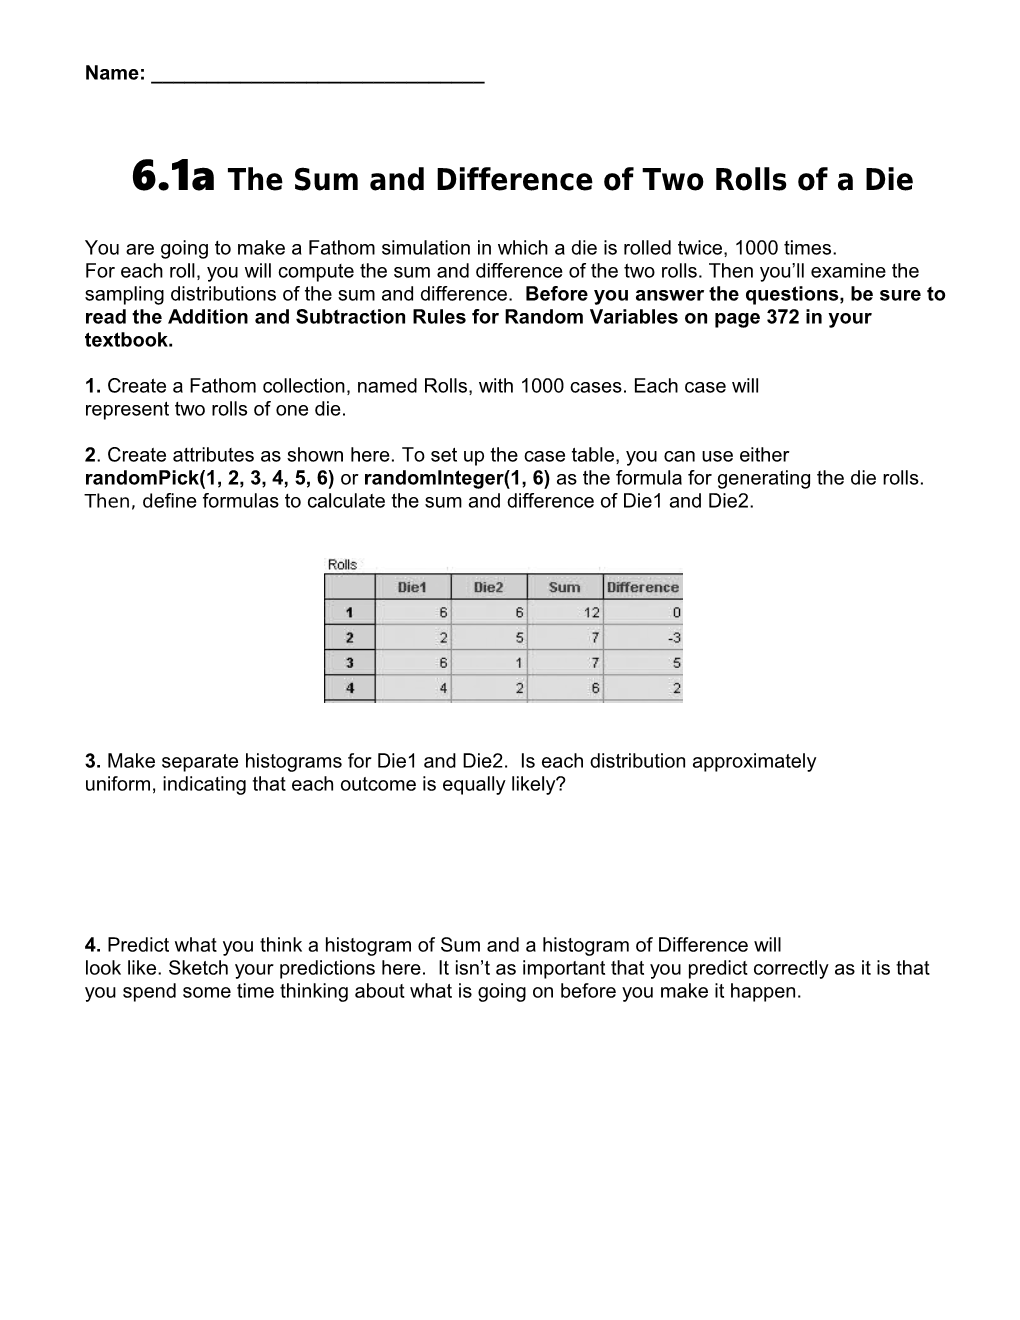 6.1A the Sum and Difference of Two Rolls of a Die